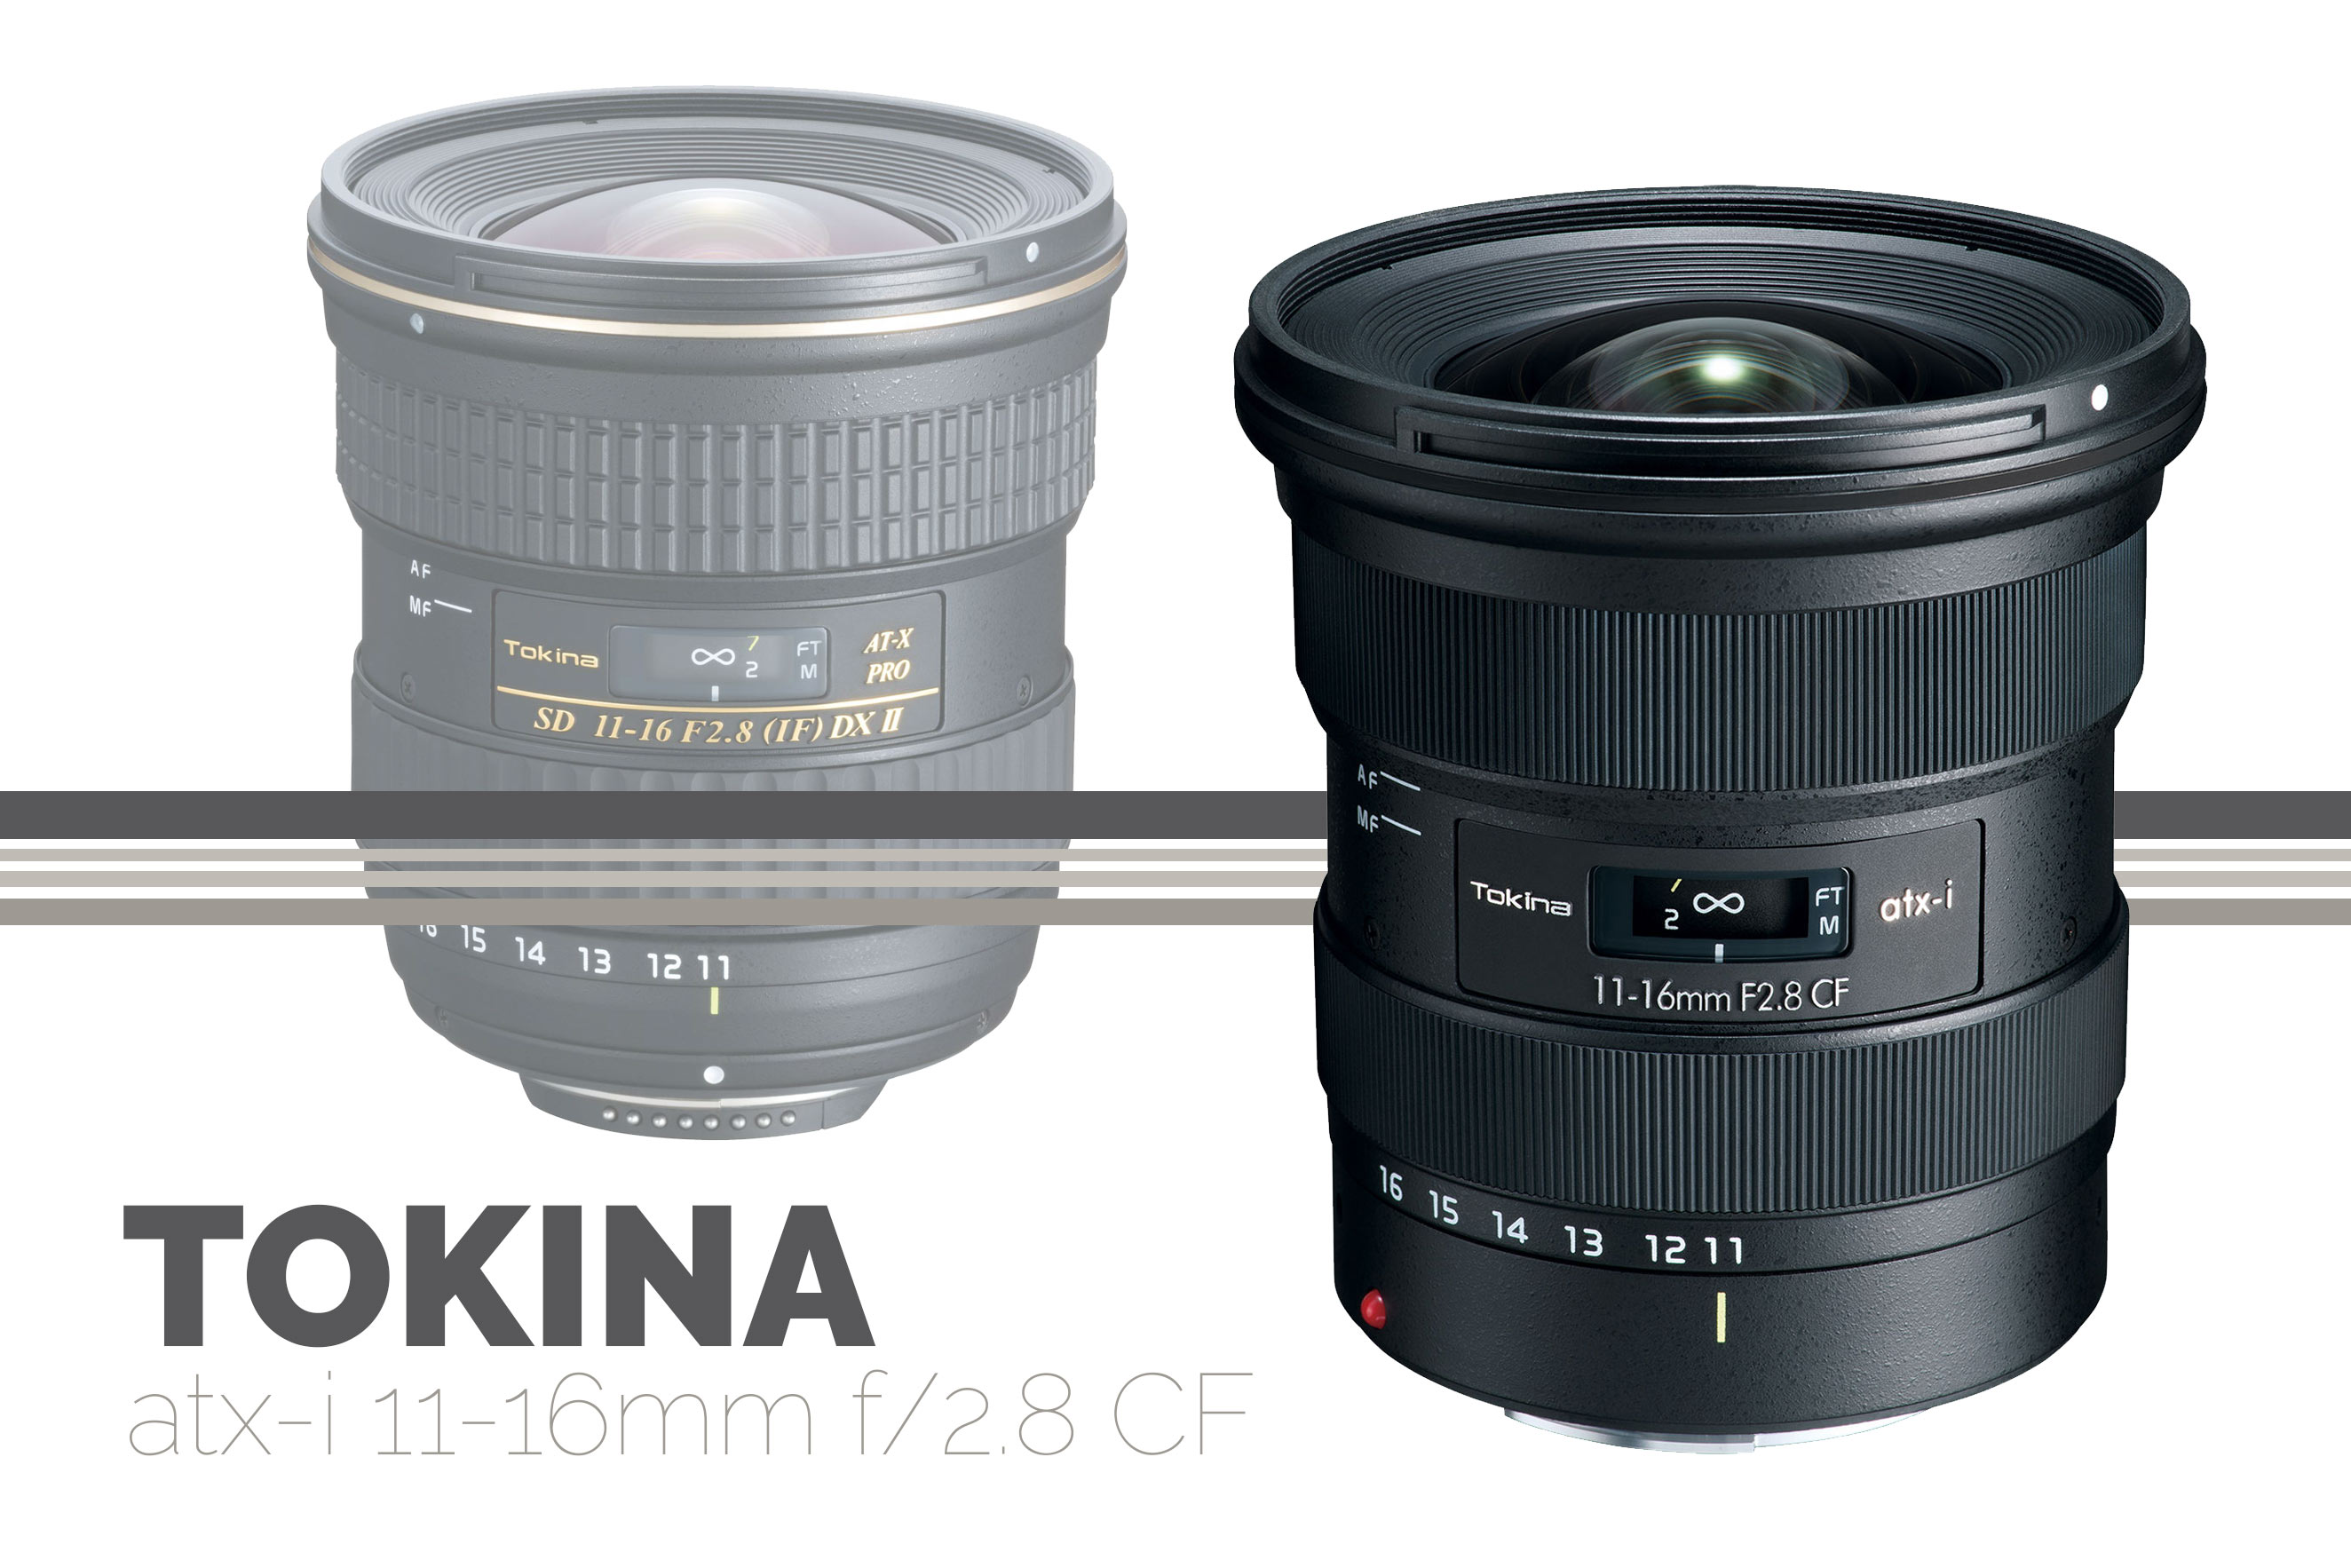 New (Looking) Tokina ATXi 11-16mm f/2.8 CF for Canon and Nikon